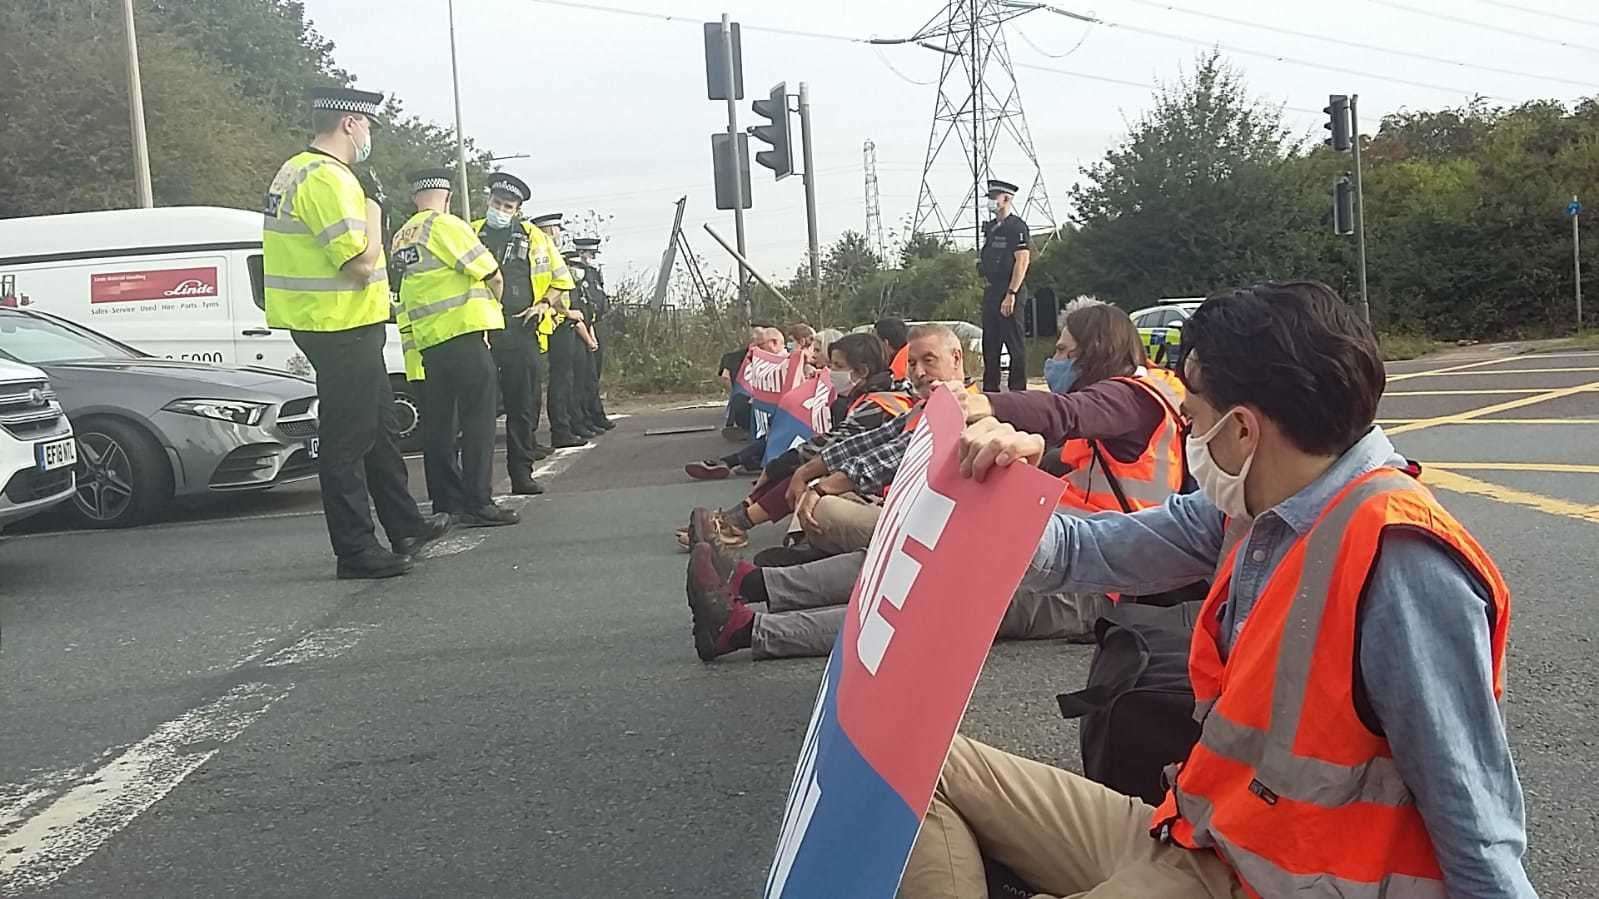 Campaign group Insulate Britain staged a sit-in across various junctions of the M25 yesterday, causing hours of delays. Photo: Insulate Britain (51255724)